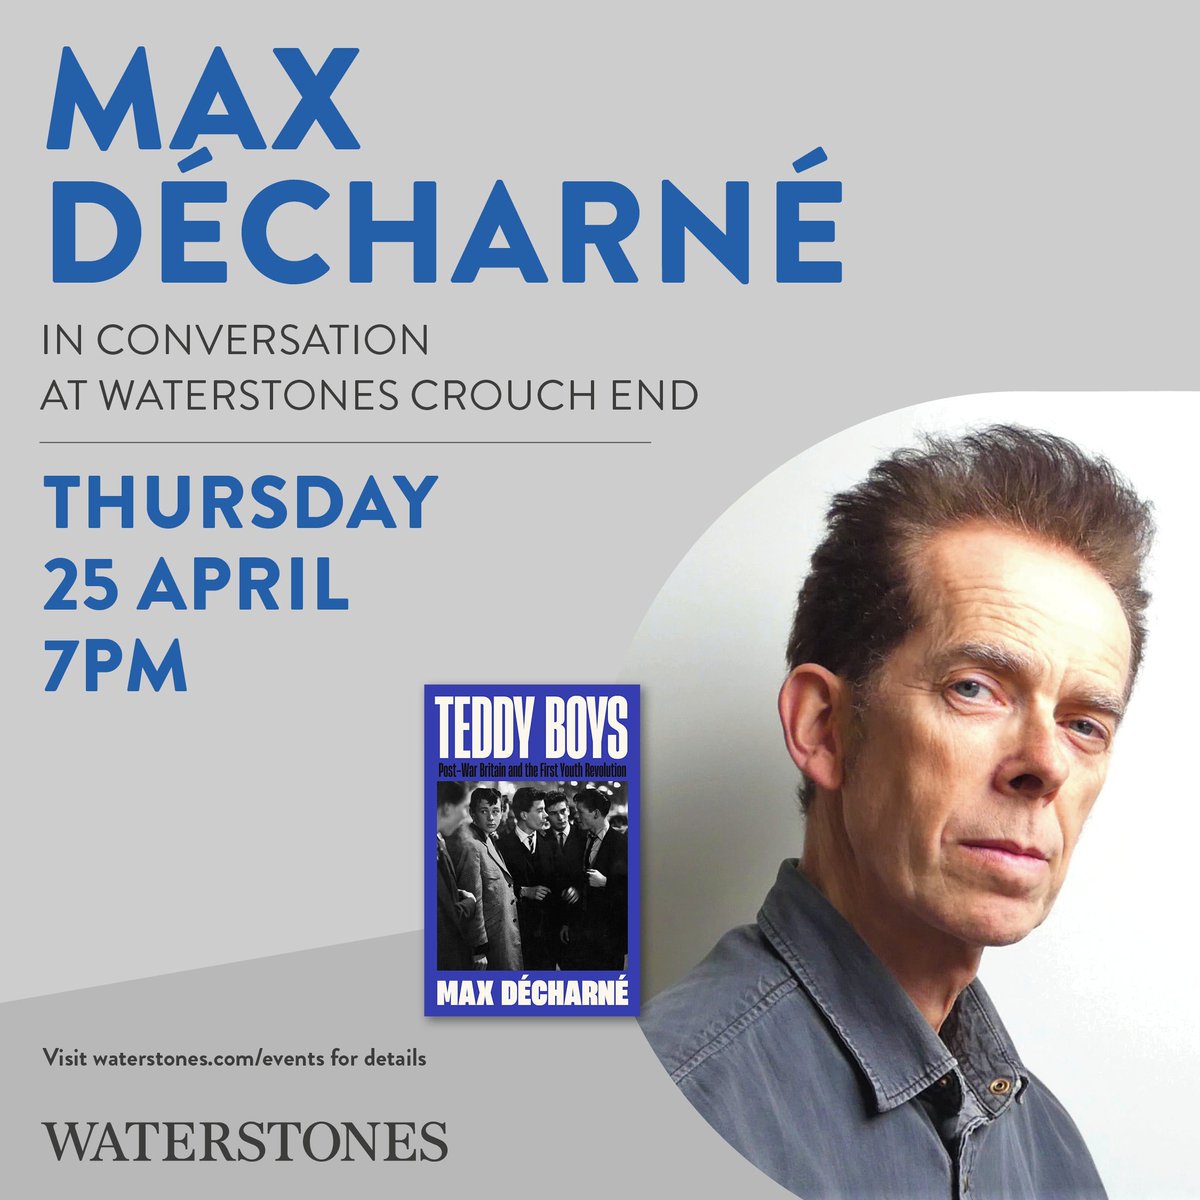 ✨TONIGHT✨ Max Décharné is speaking to us about his latest book Teddy Boys! Limited tickets available on the door! Book to avoid a last minute rush ➡️waterstones.com/events/search/…